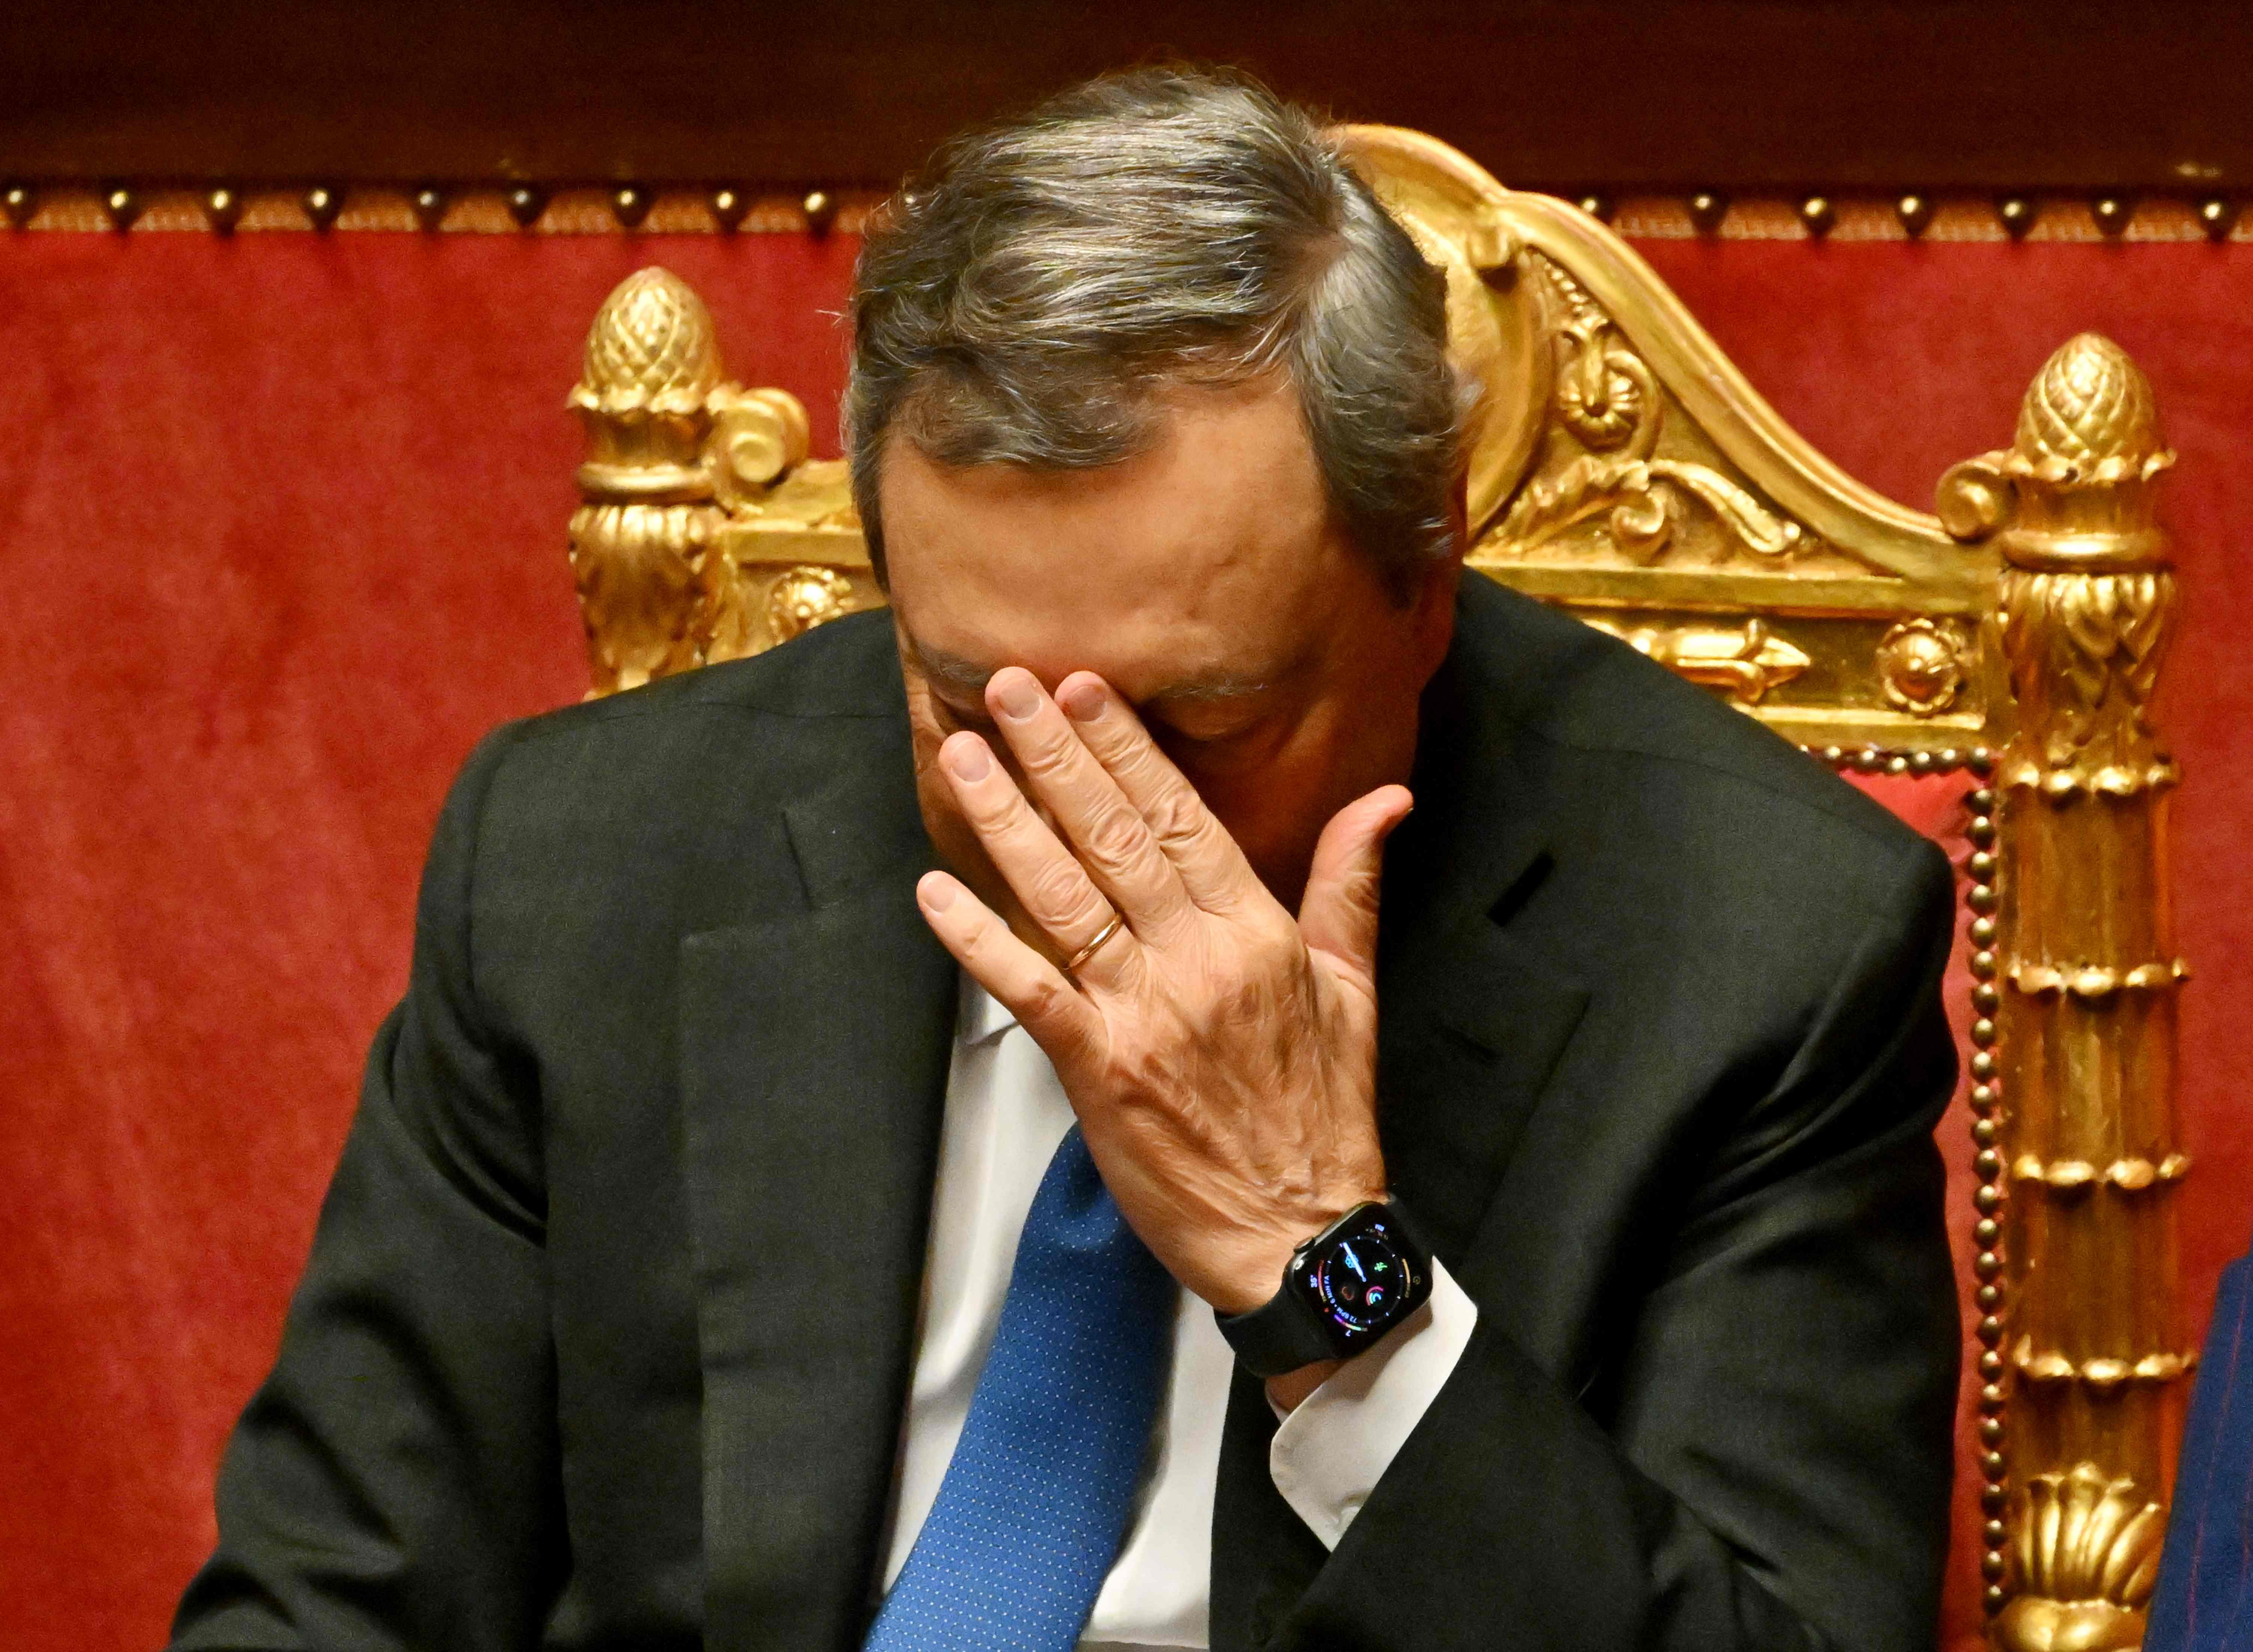 Italy's prime minister and his government had been in power for 17 months